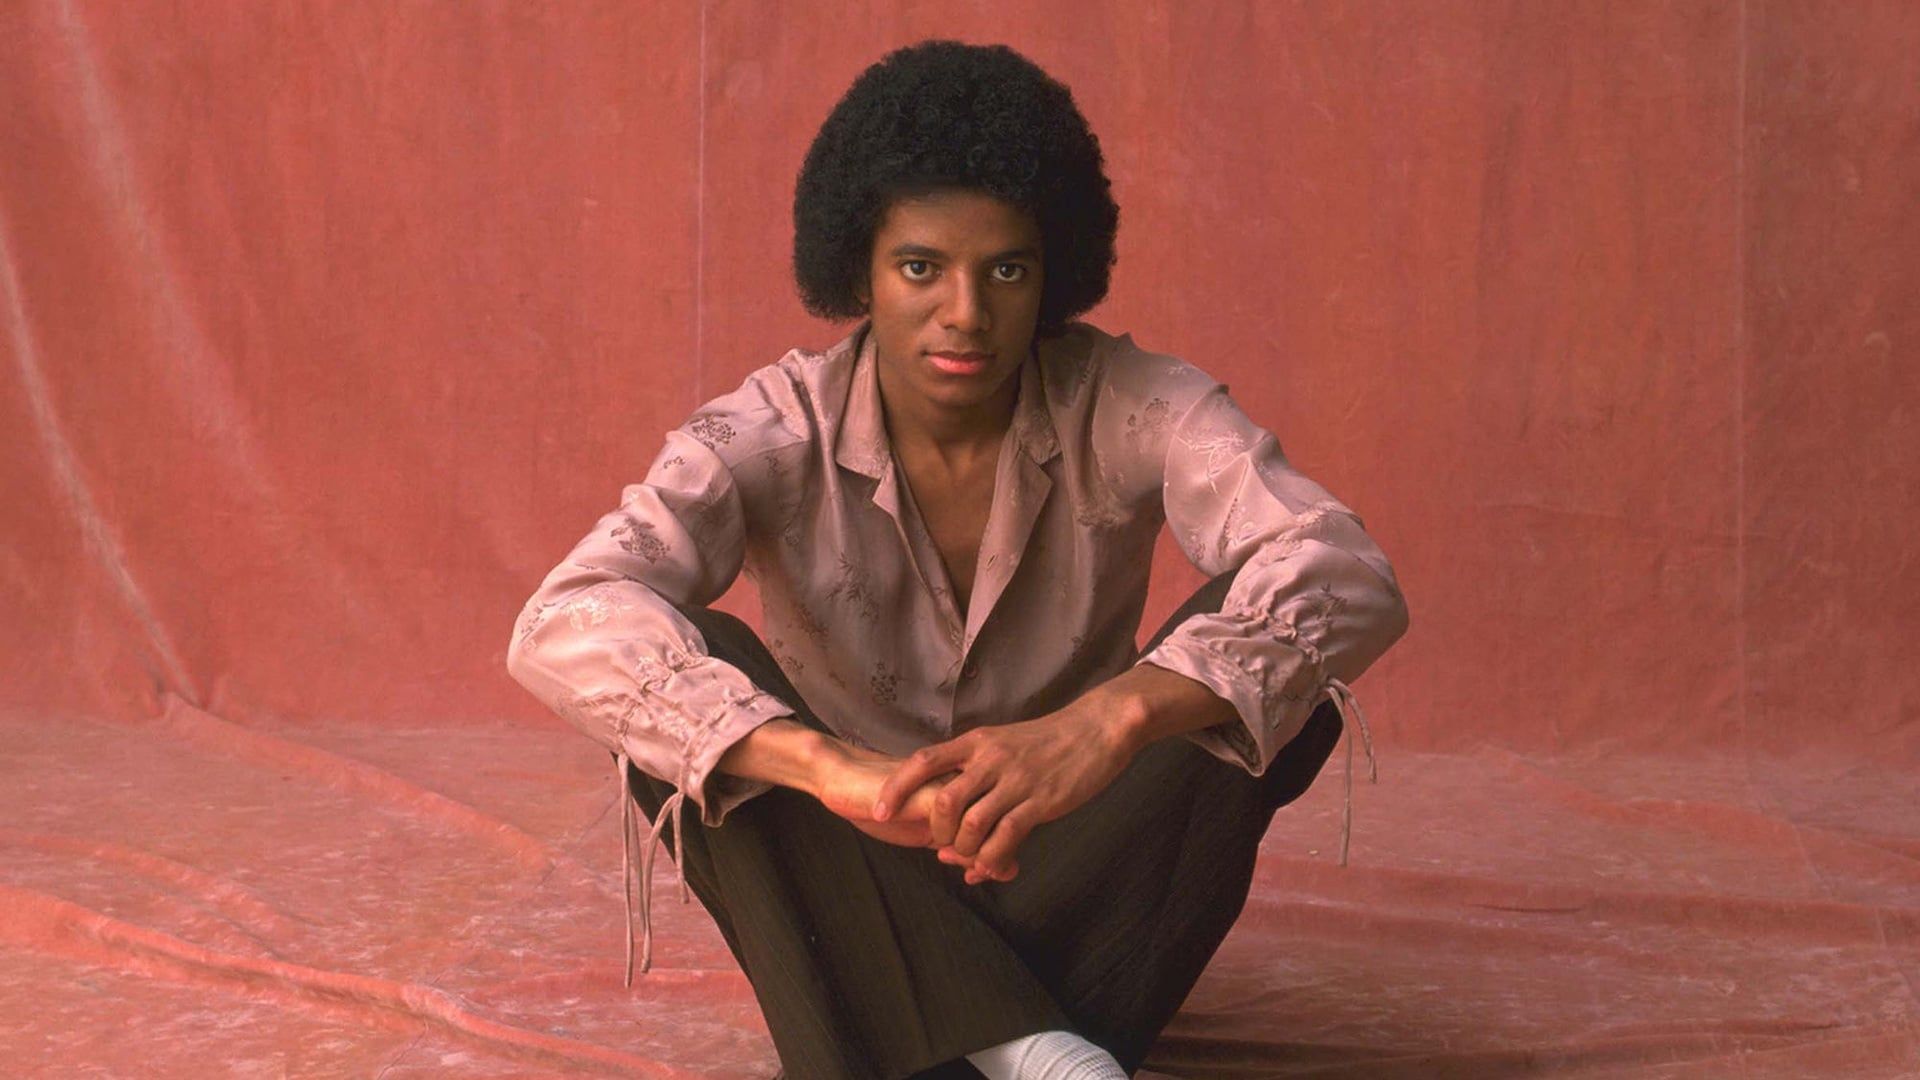 Michael Jackson: Man in the Mirror background